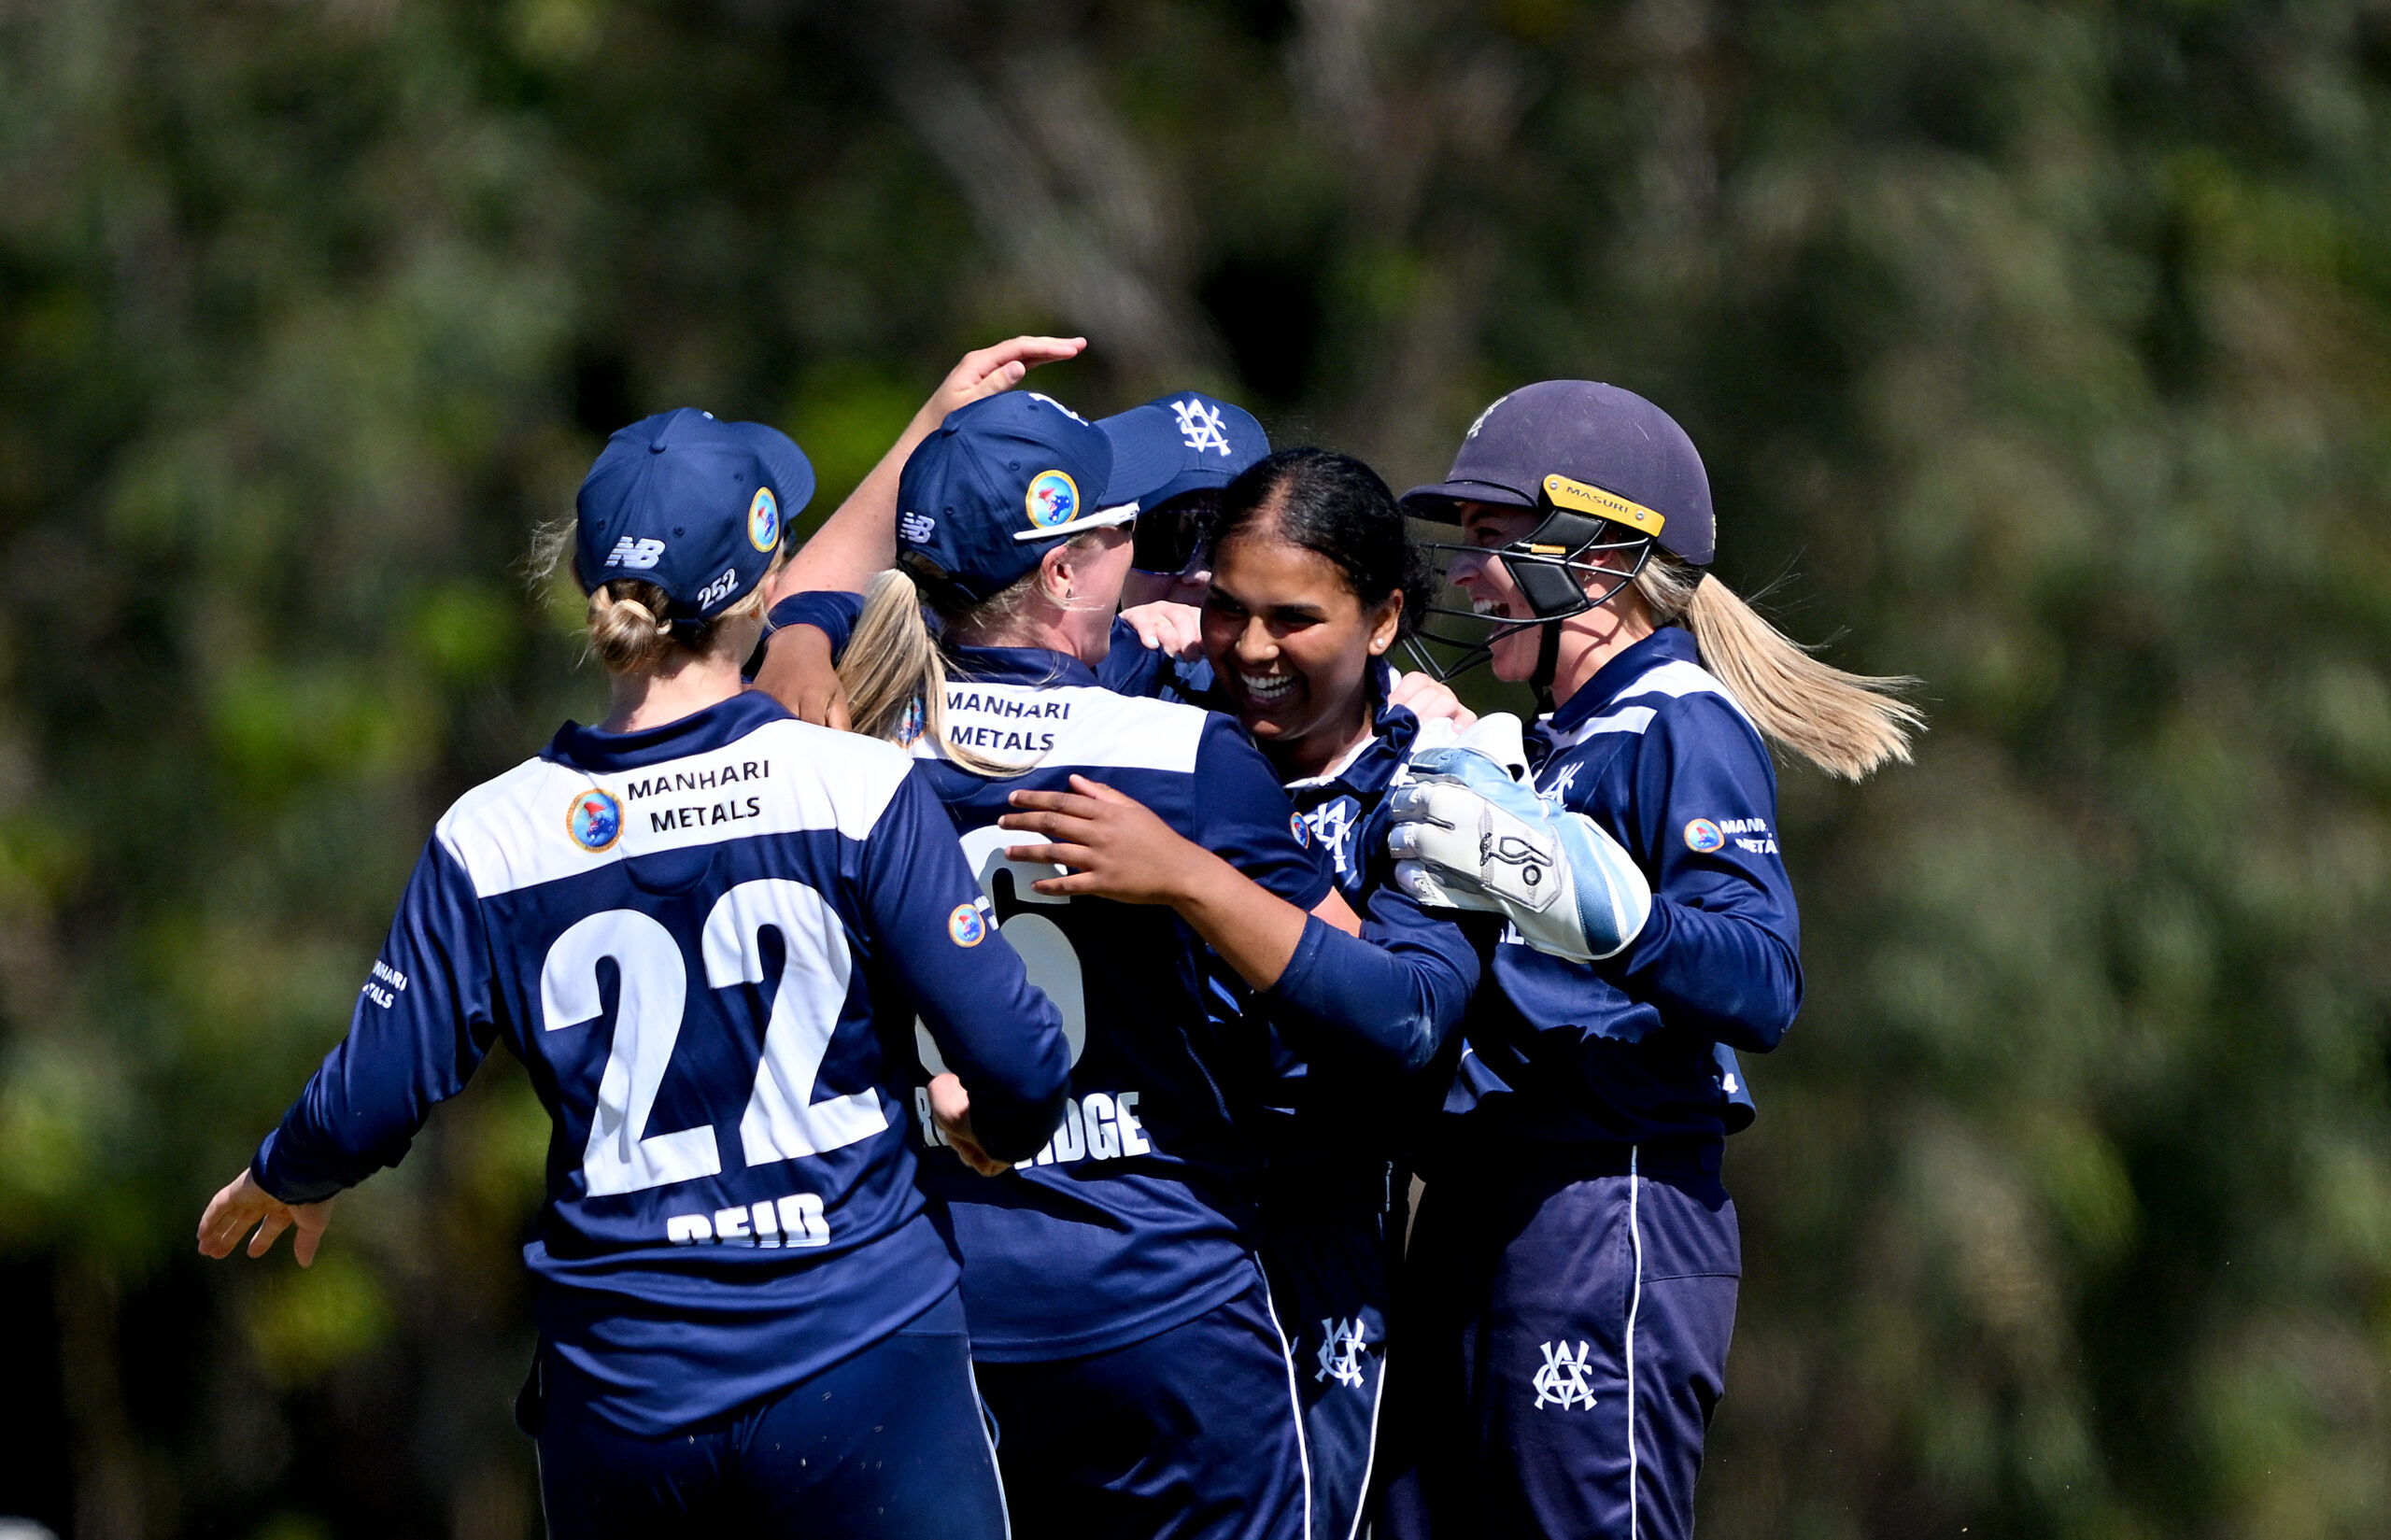 Victoria name squads for Under 19 Female Championships